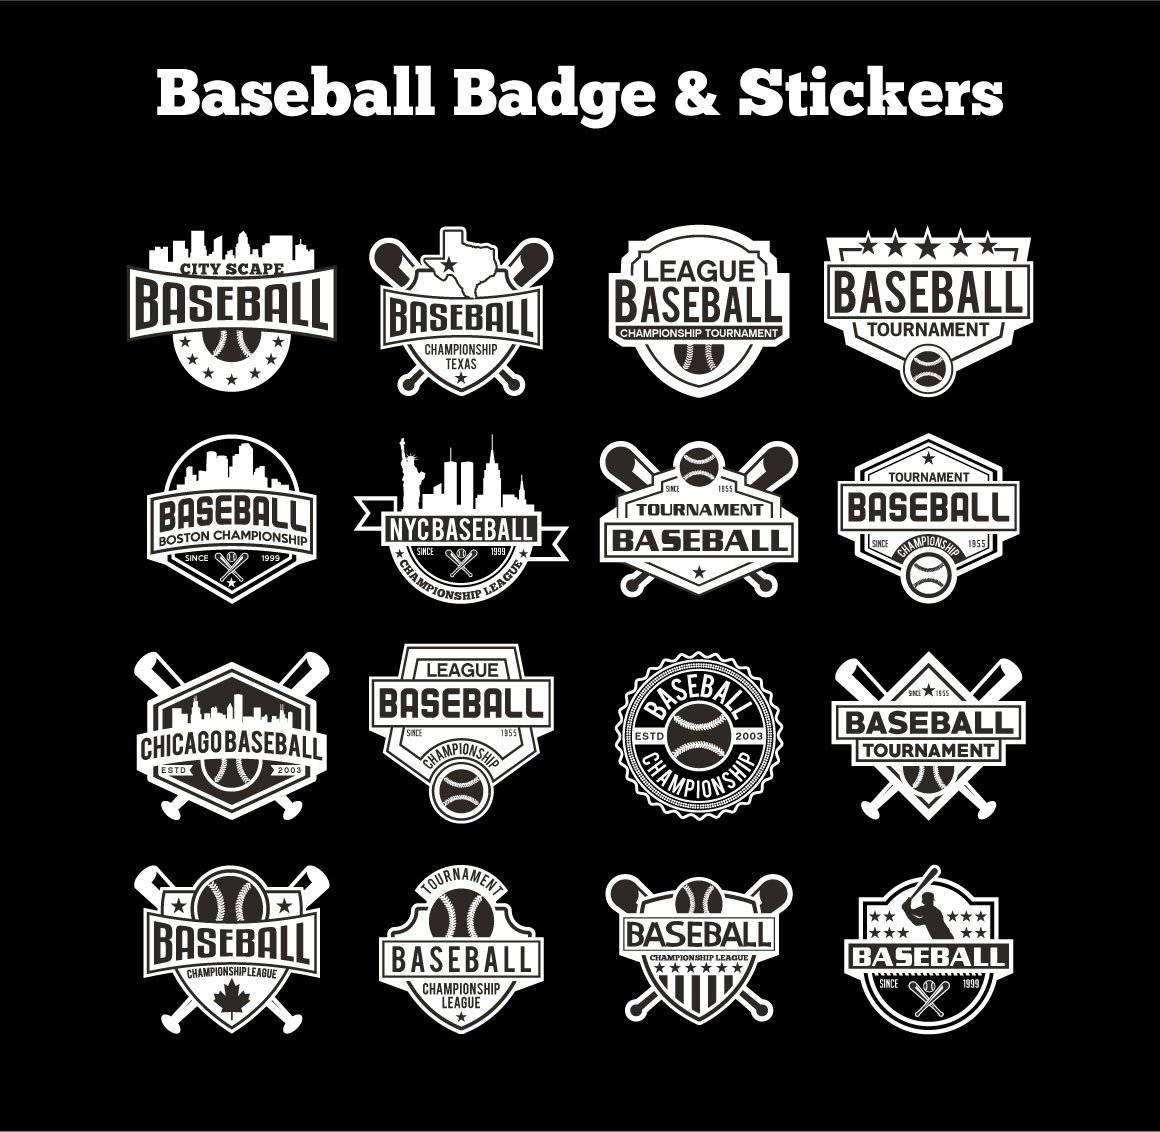 Baseball Badge & Stickers Vol3 preview image.